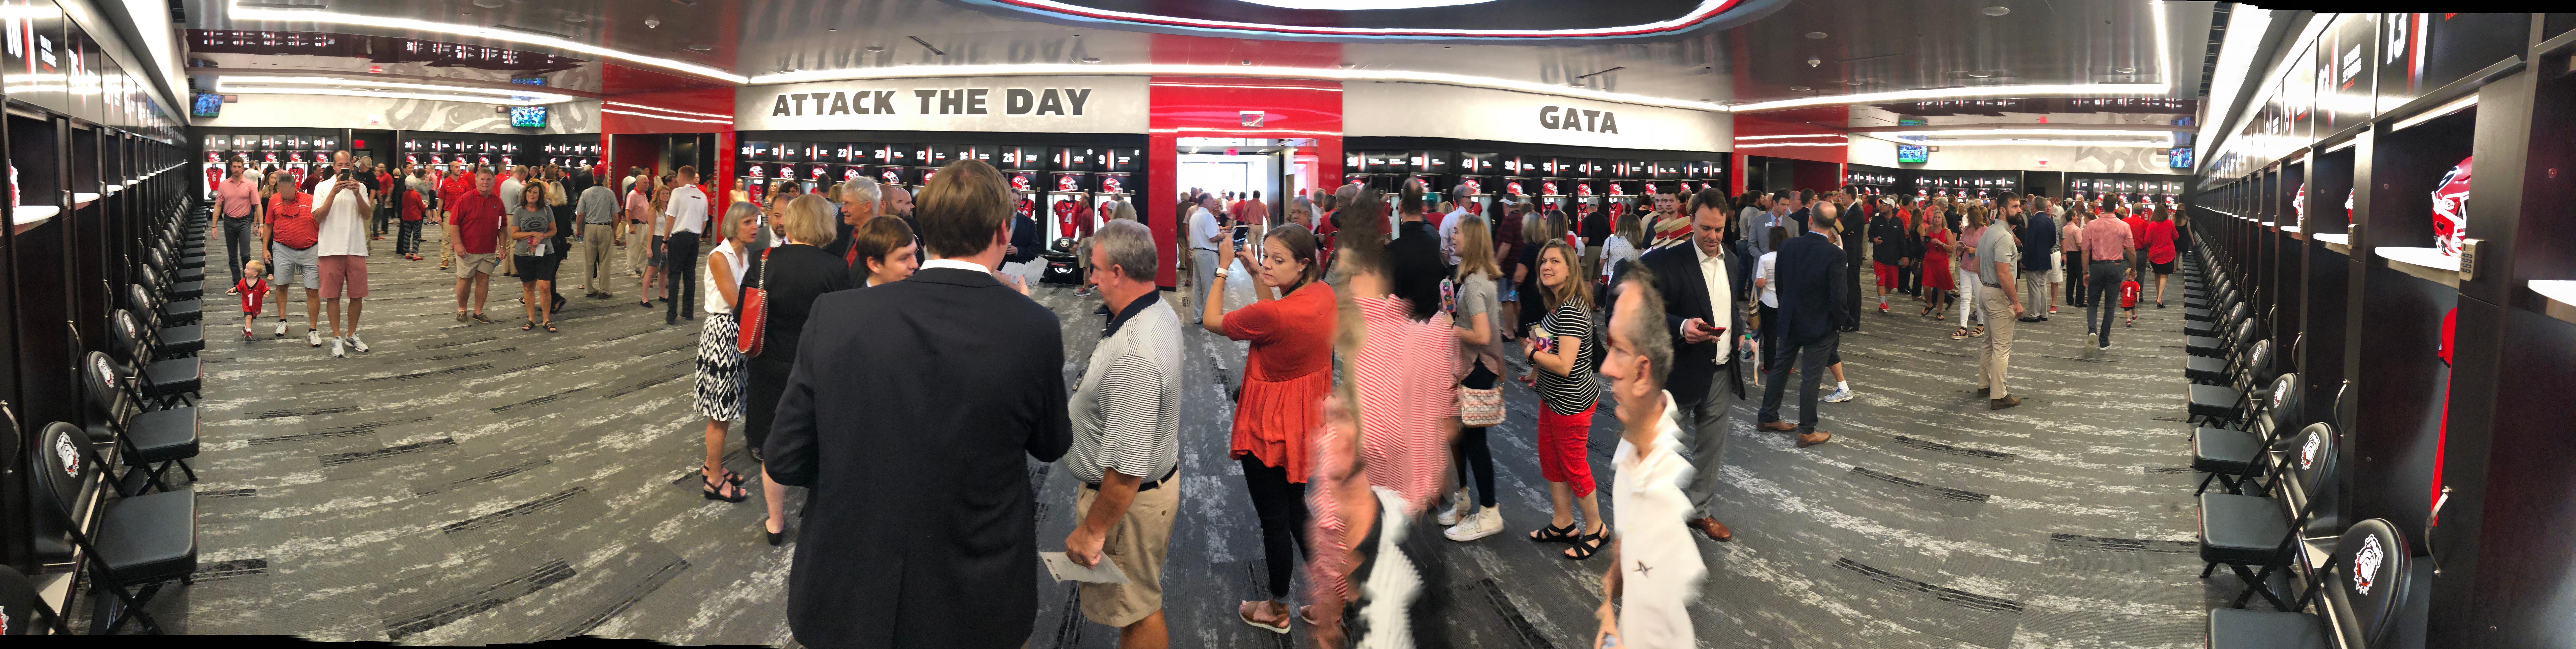 From small towns to Sanford Stadium, Kirby Smart is the same man he was  back when – Sowegalive